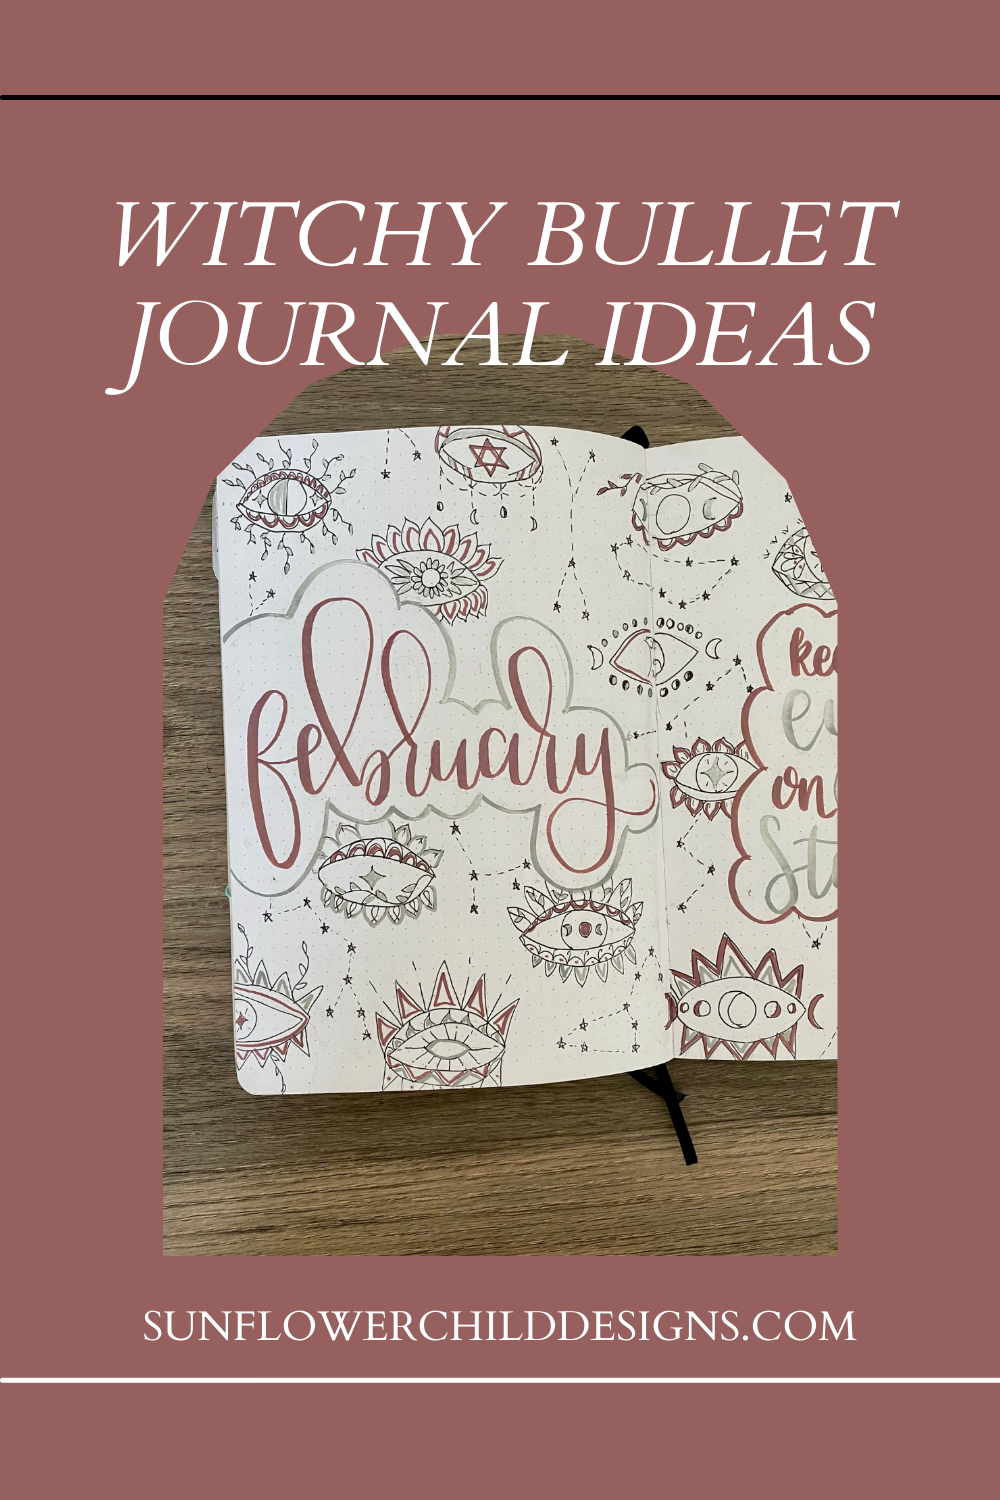 witchy-bullet-journal-ideas-february-bullet-journal-ideas 11.png